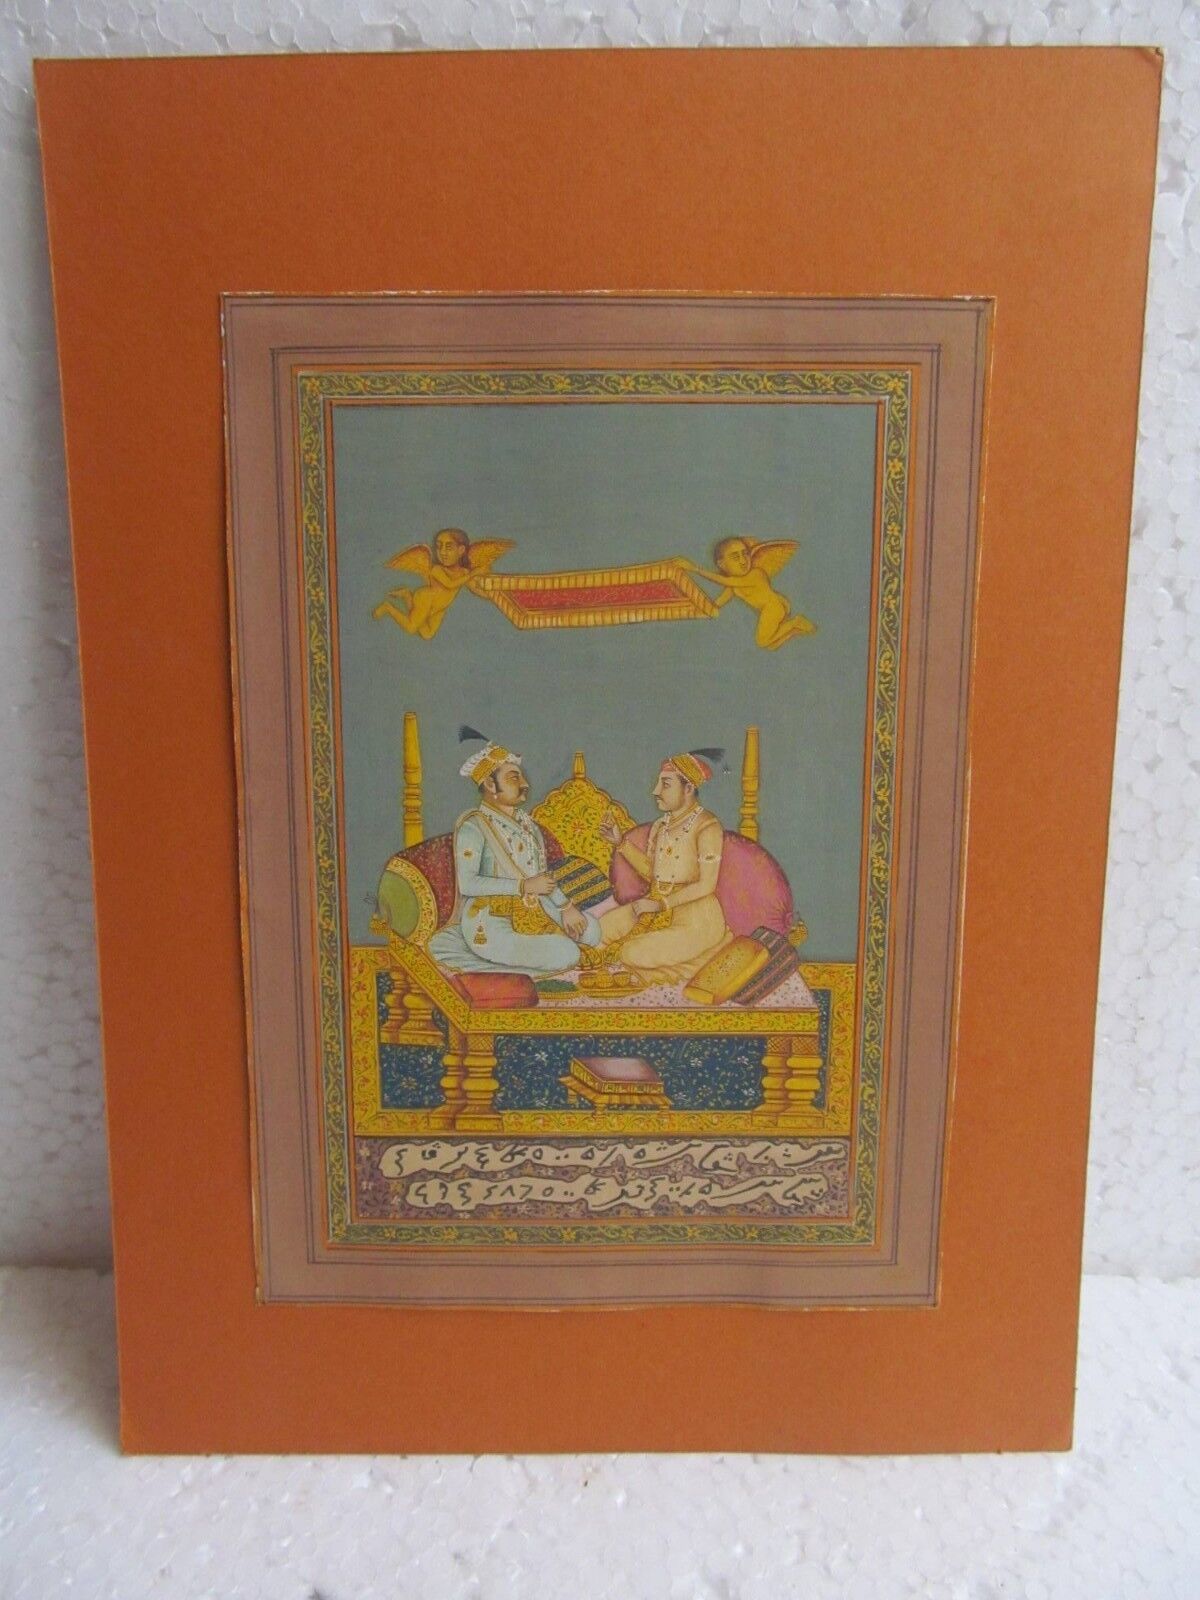 OLD ANTIQUE HAND MADE WATER COLOR PAINTING MINIATURE OF INDIAN ROYALS DISCUSSION